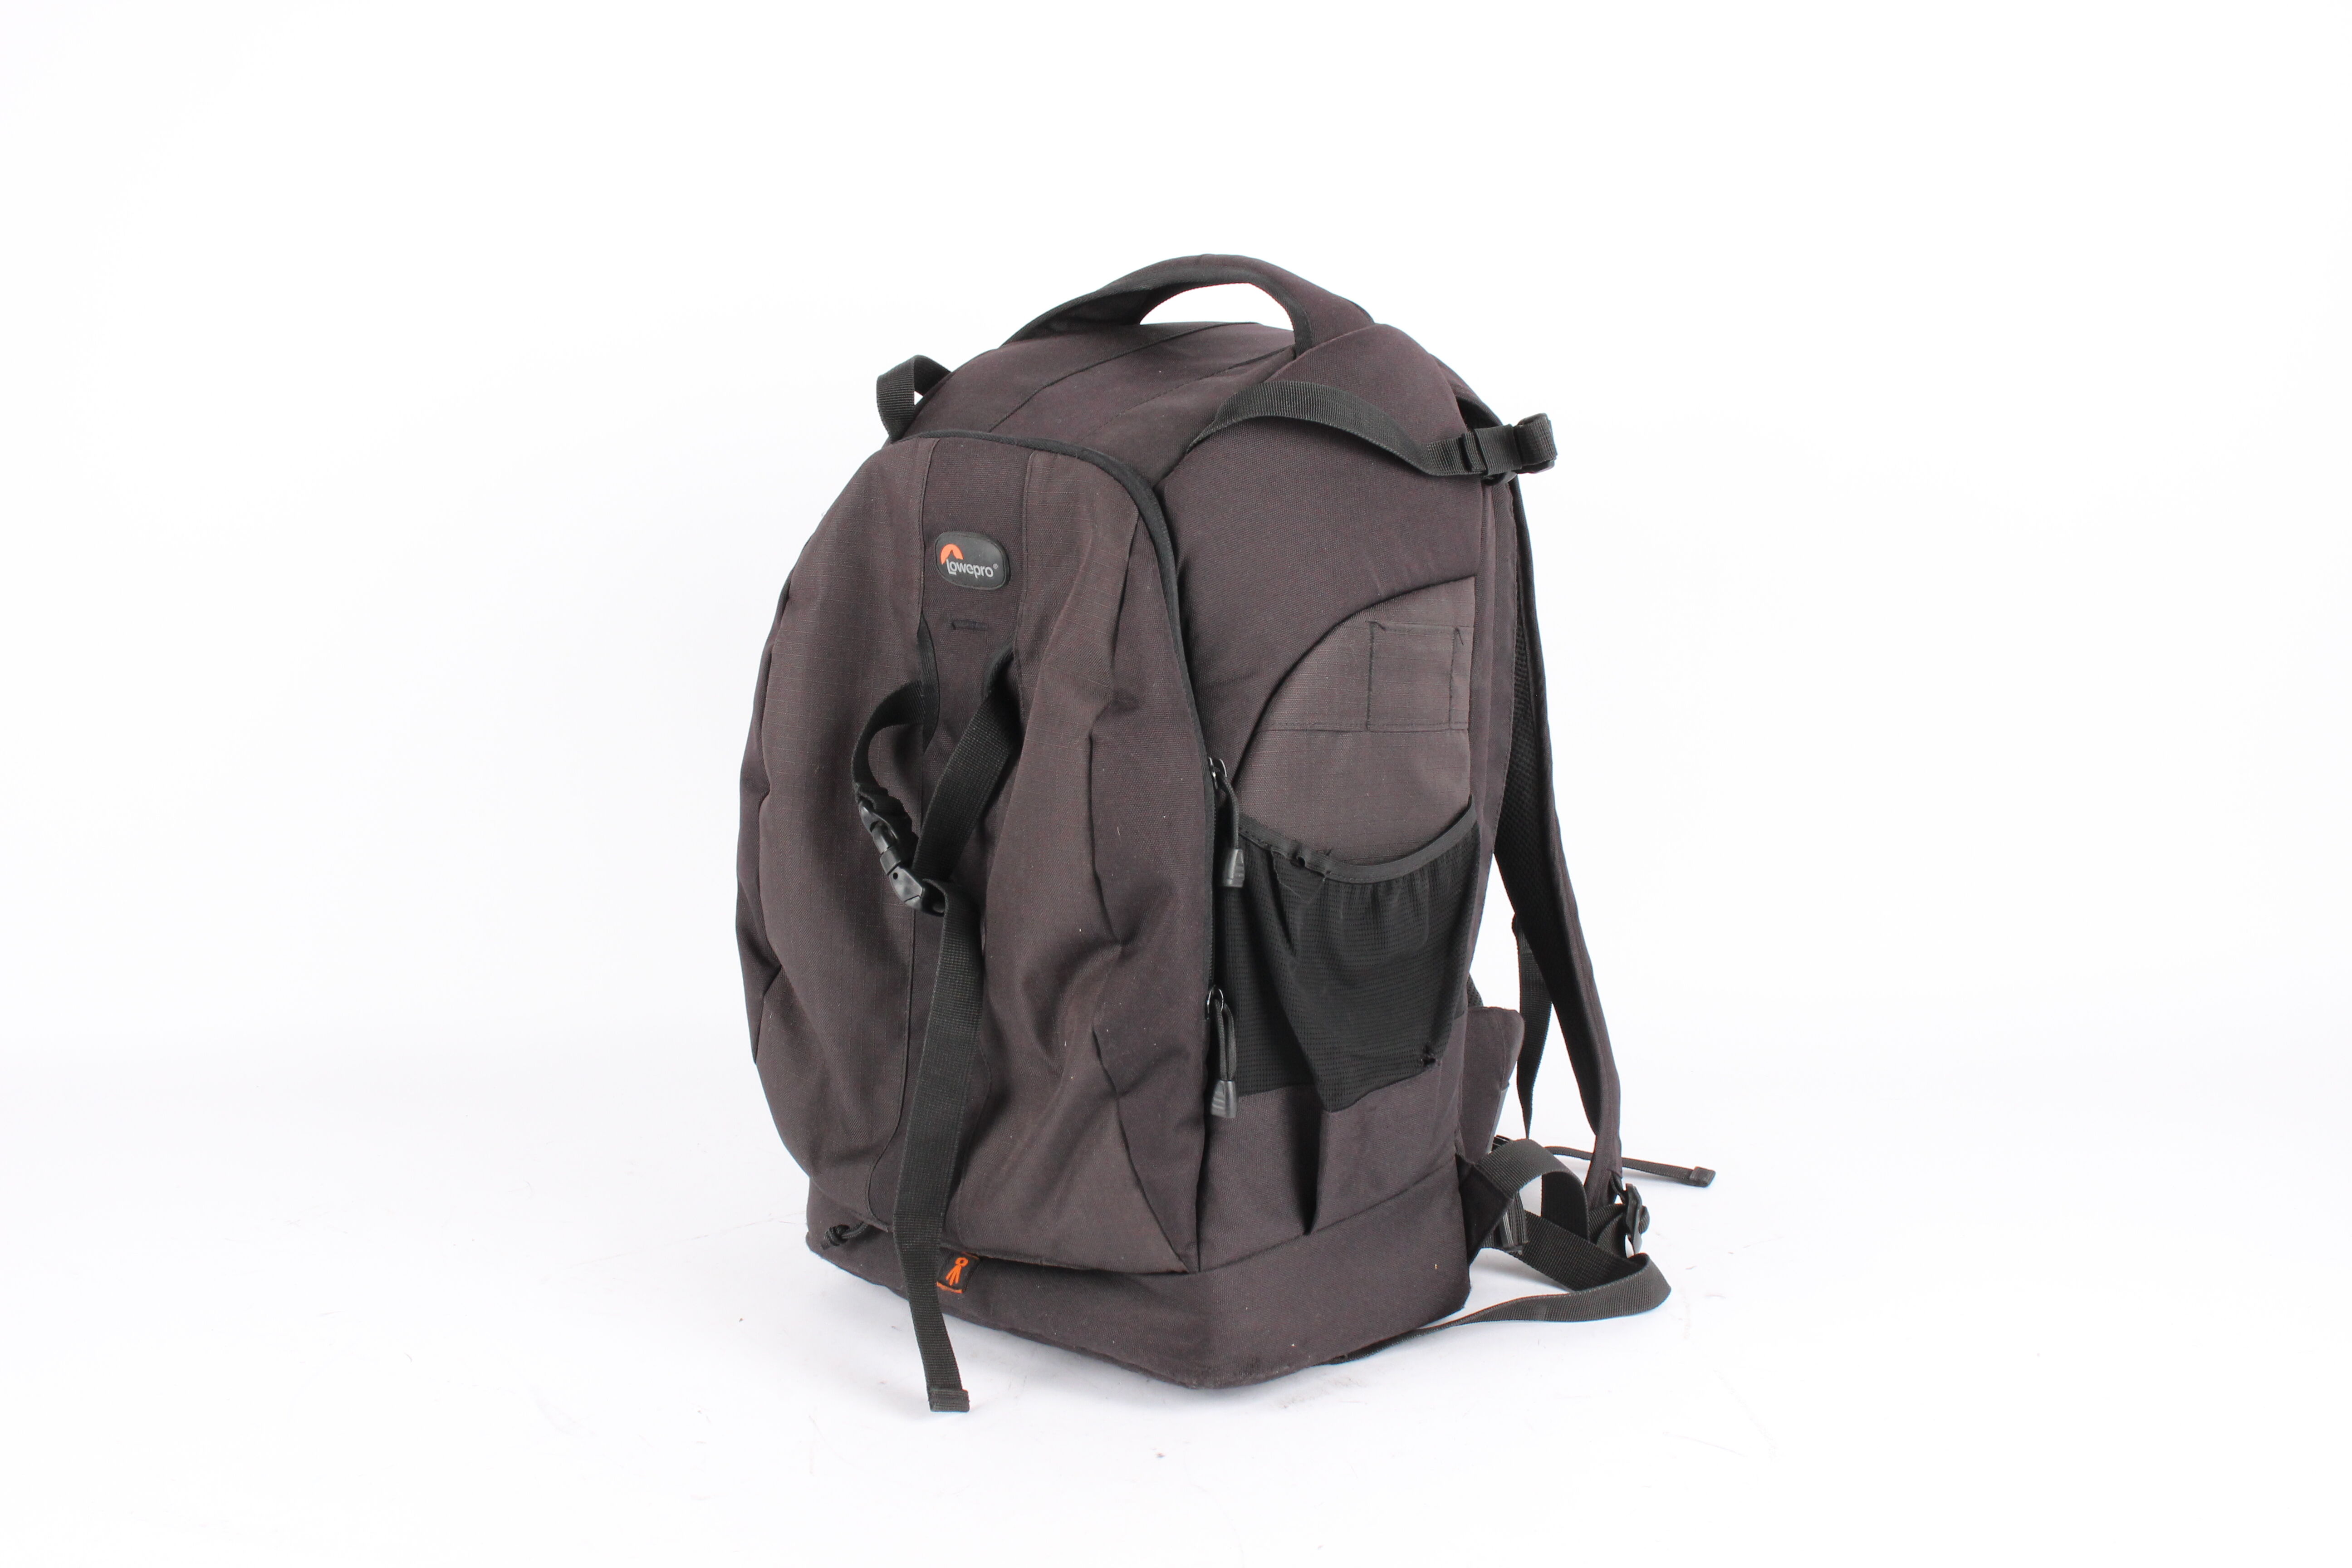 Lowepro Flipside 500 AW Backpack (Condition: Heavily Used)